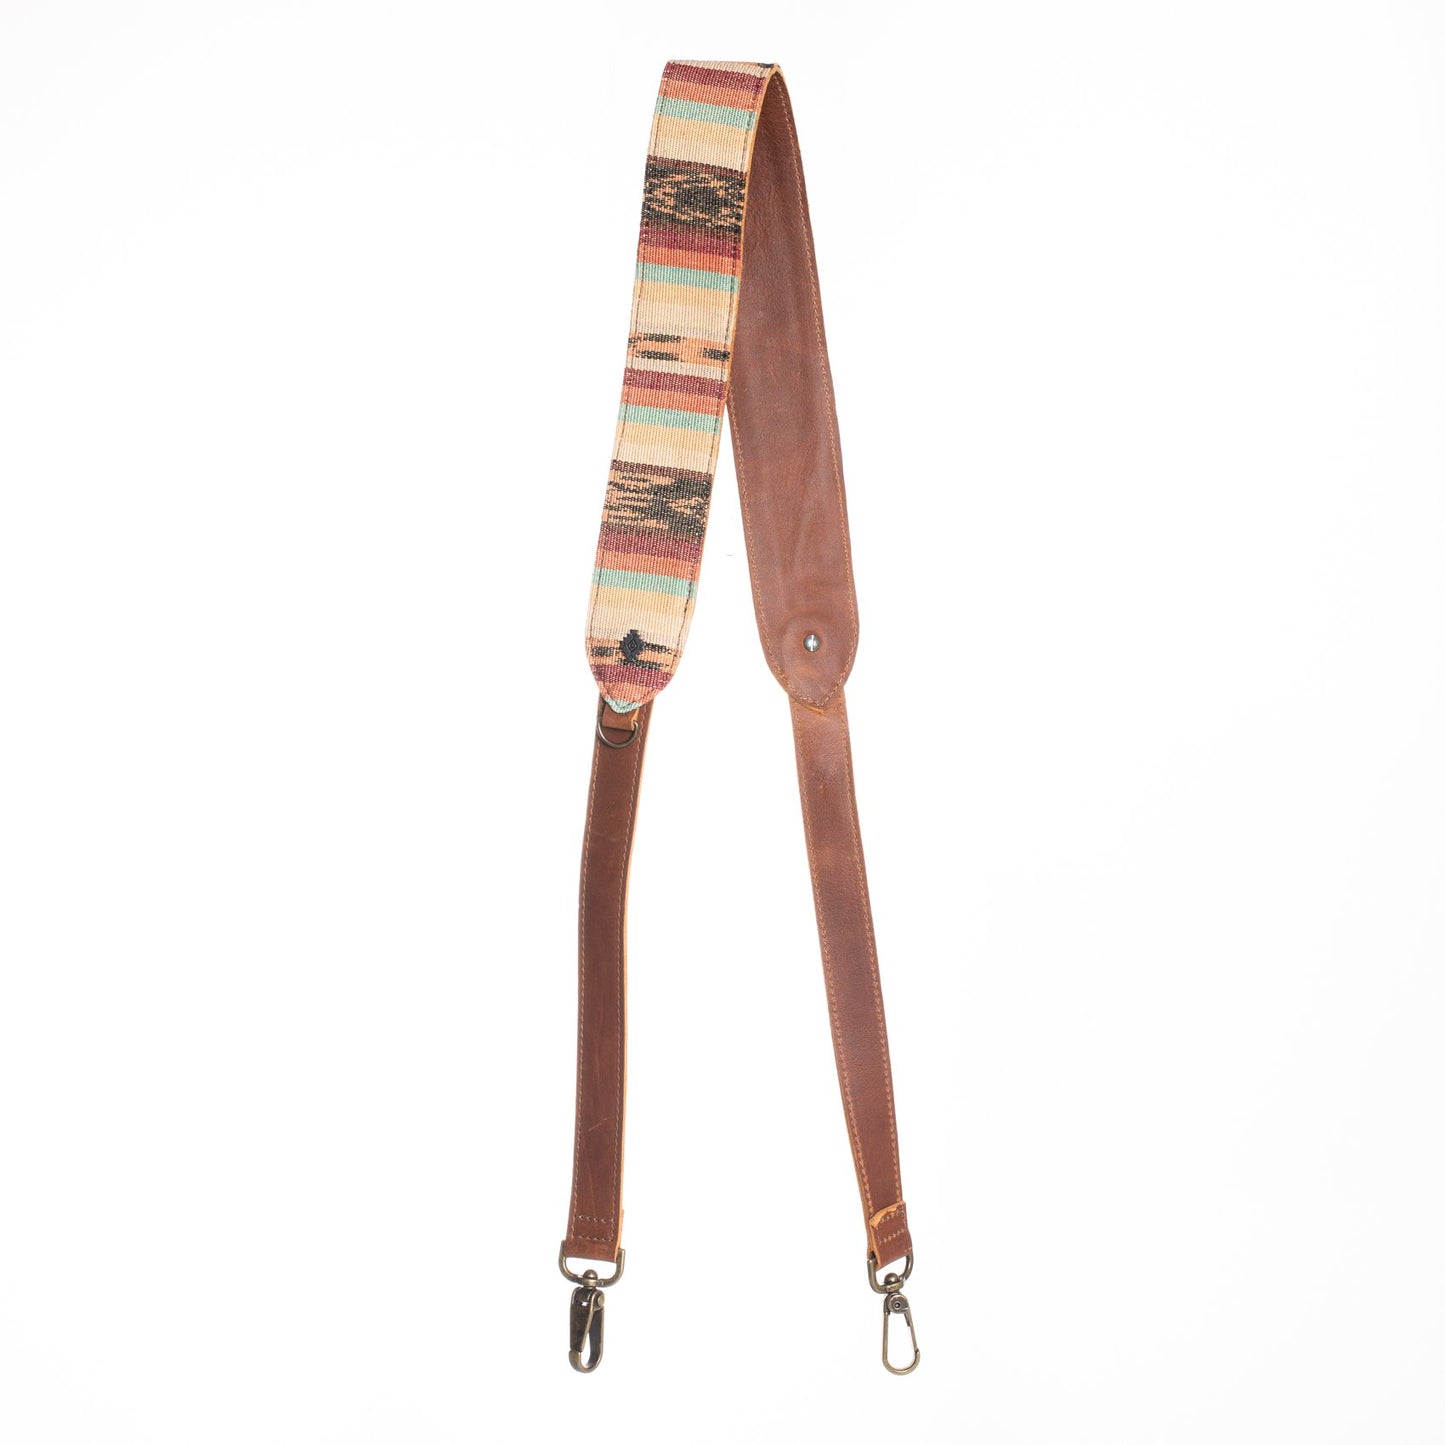 UTILITY STRAP 47" - ARTISAN COLLECTION - SANDSTONE - CAFE LEATHER